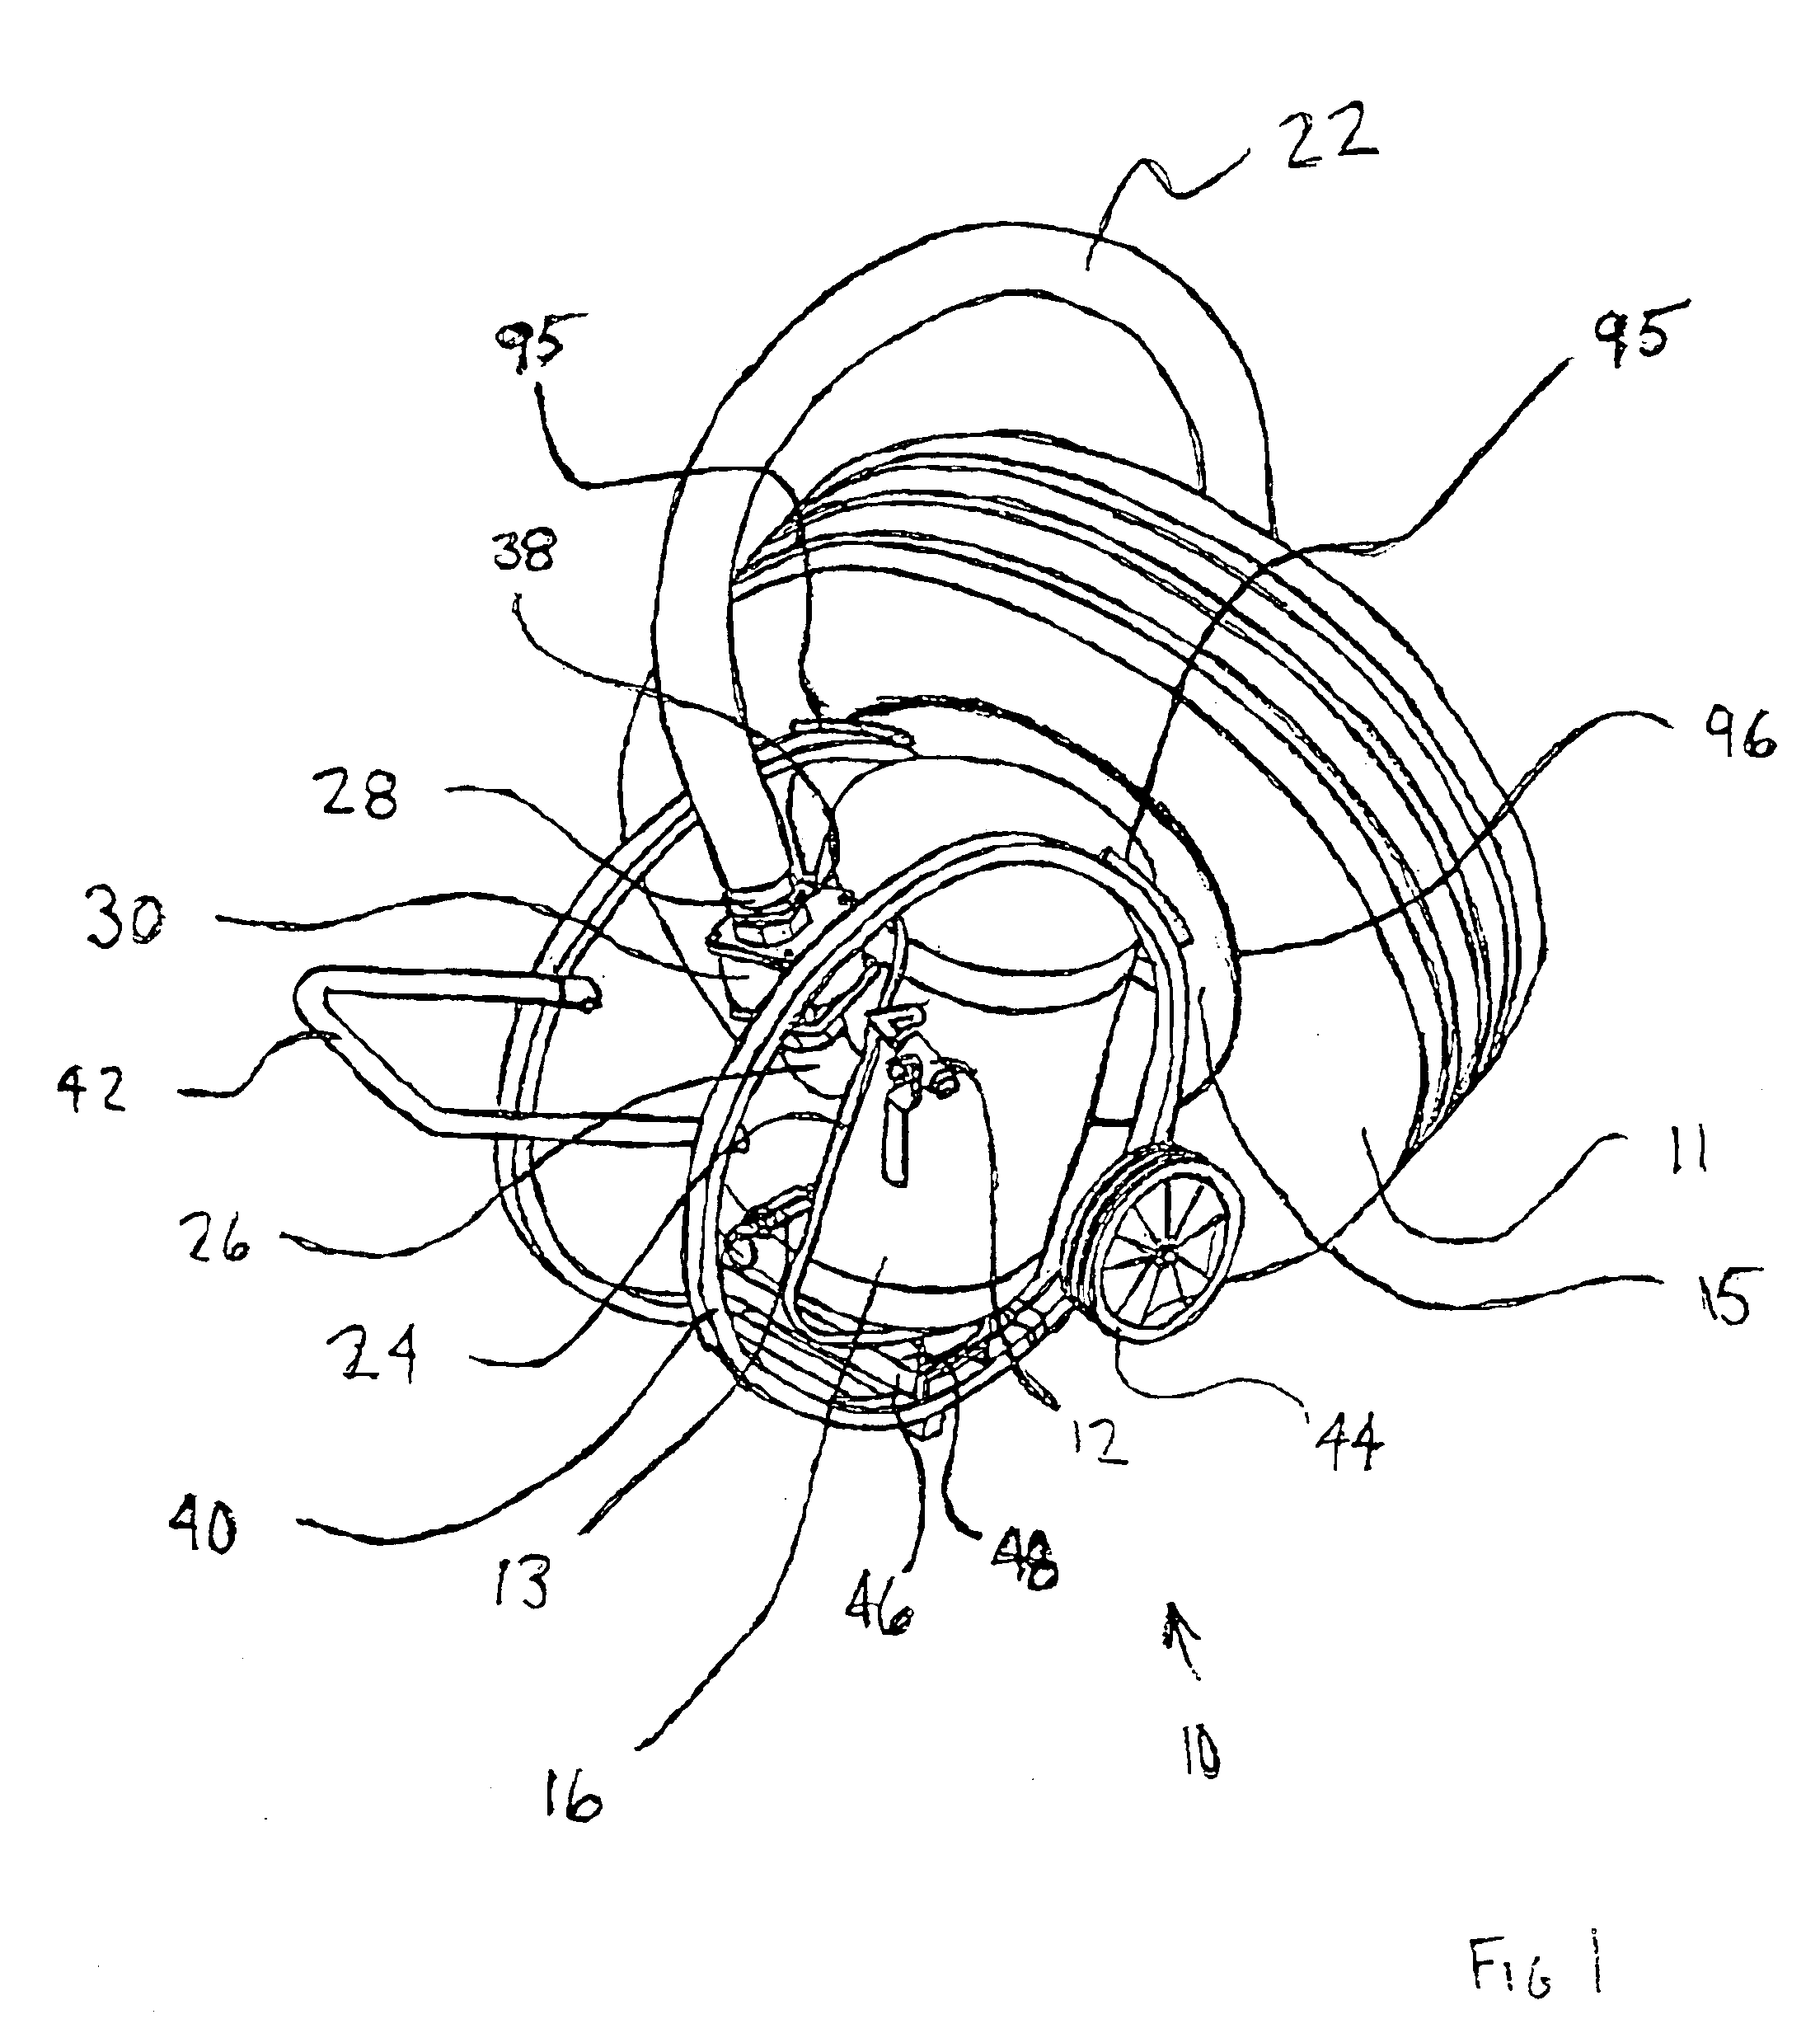 Inflating device for tires